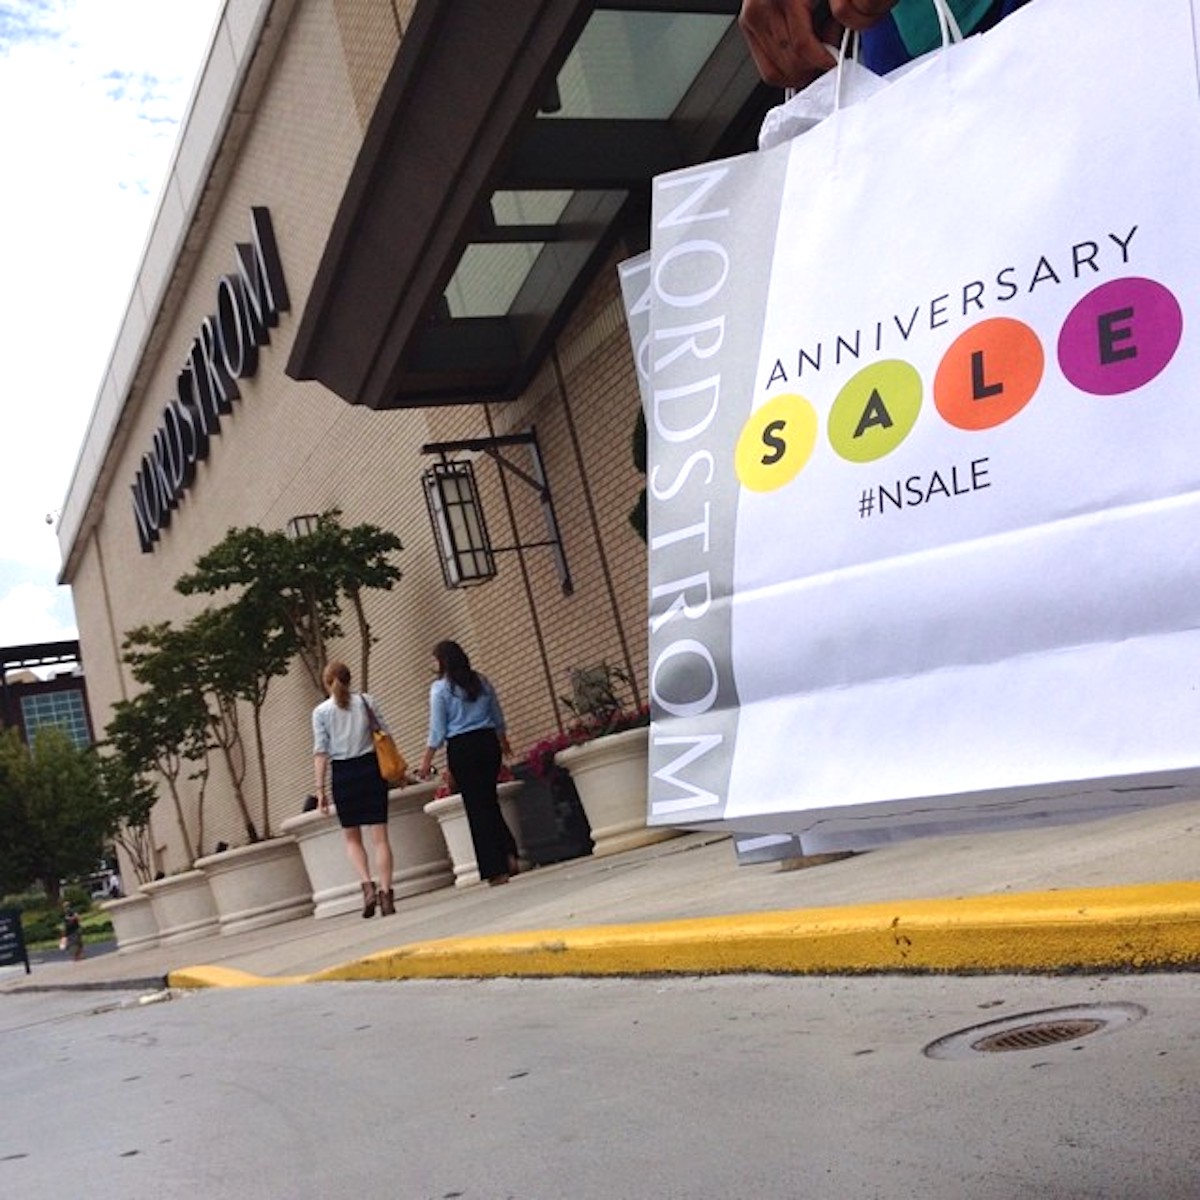 Nordstrom to Close 16 Stores While Readying Itself to Reopen